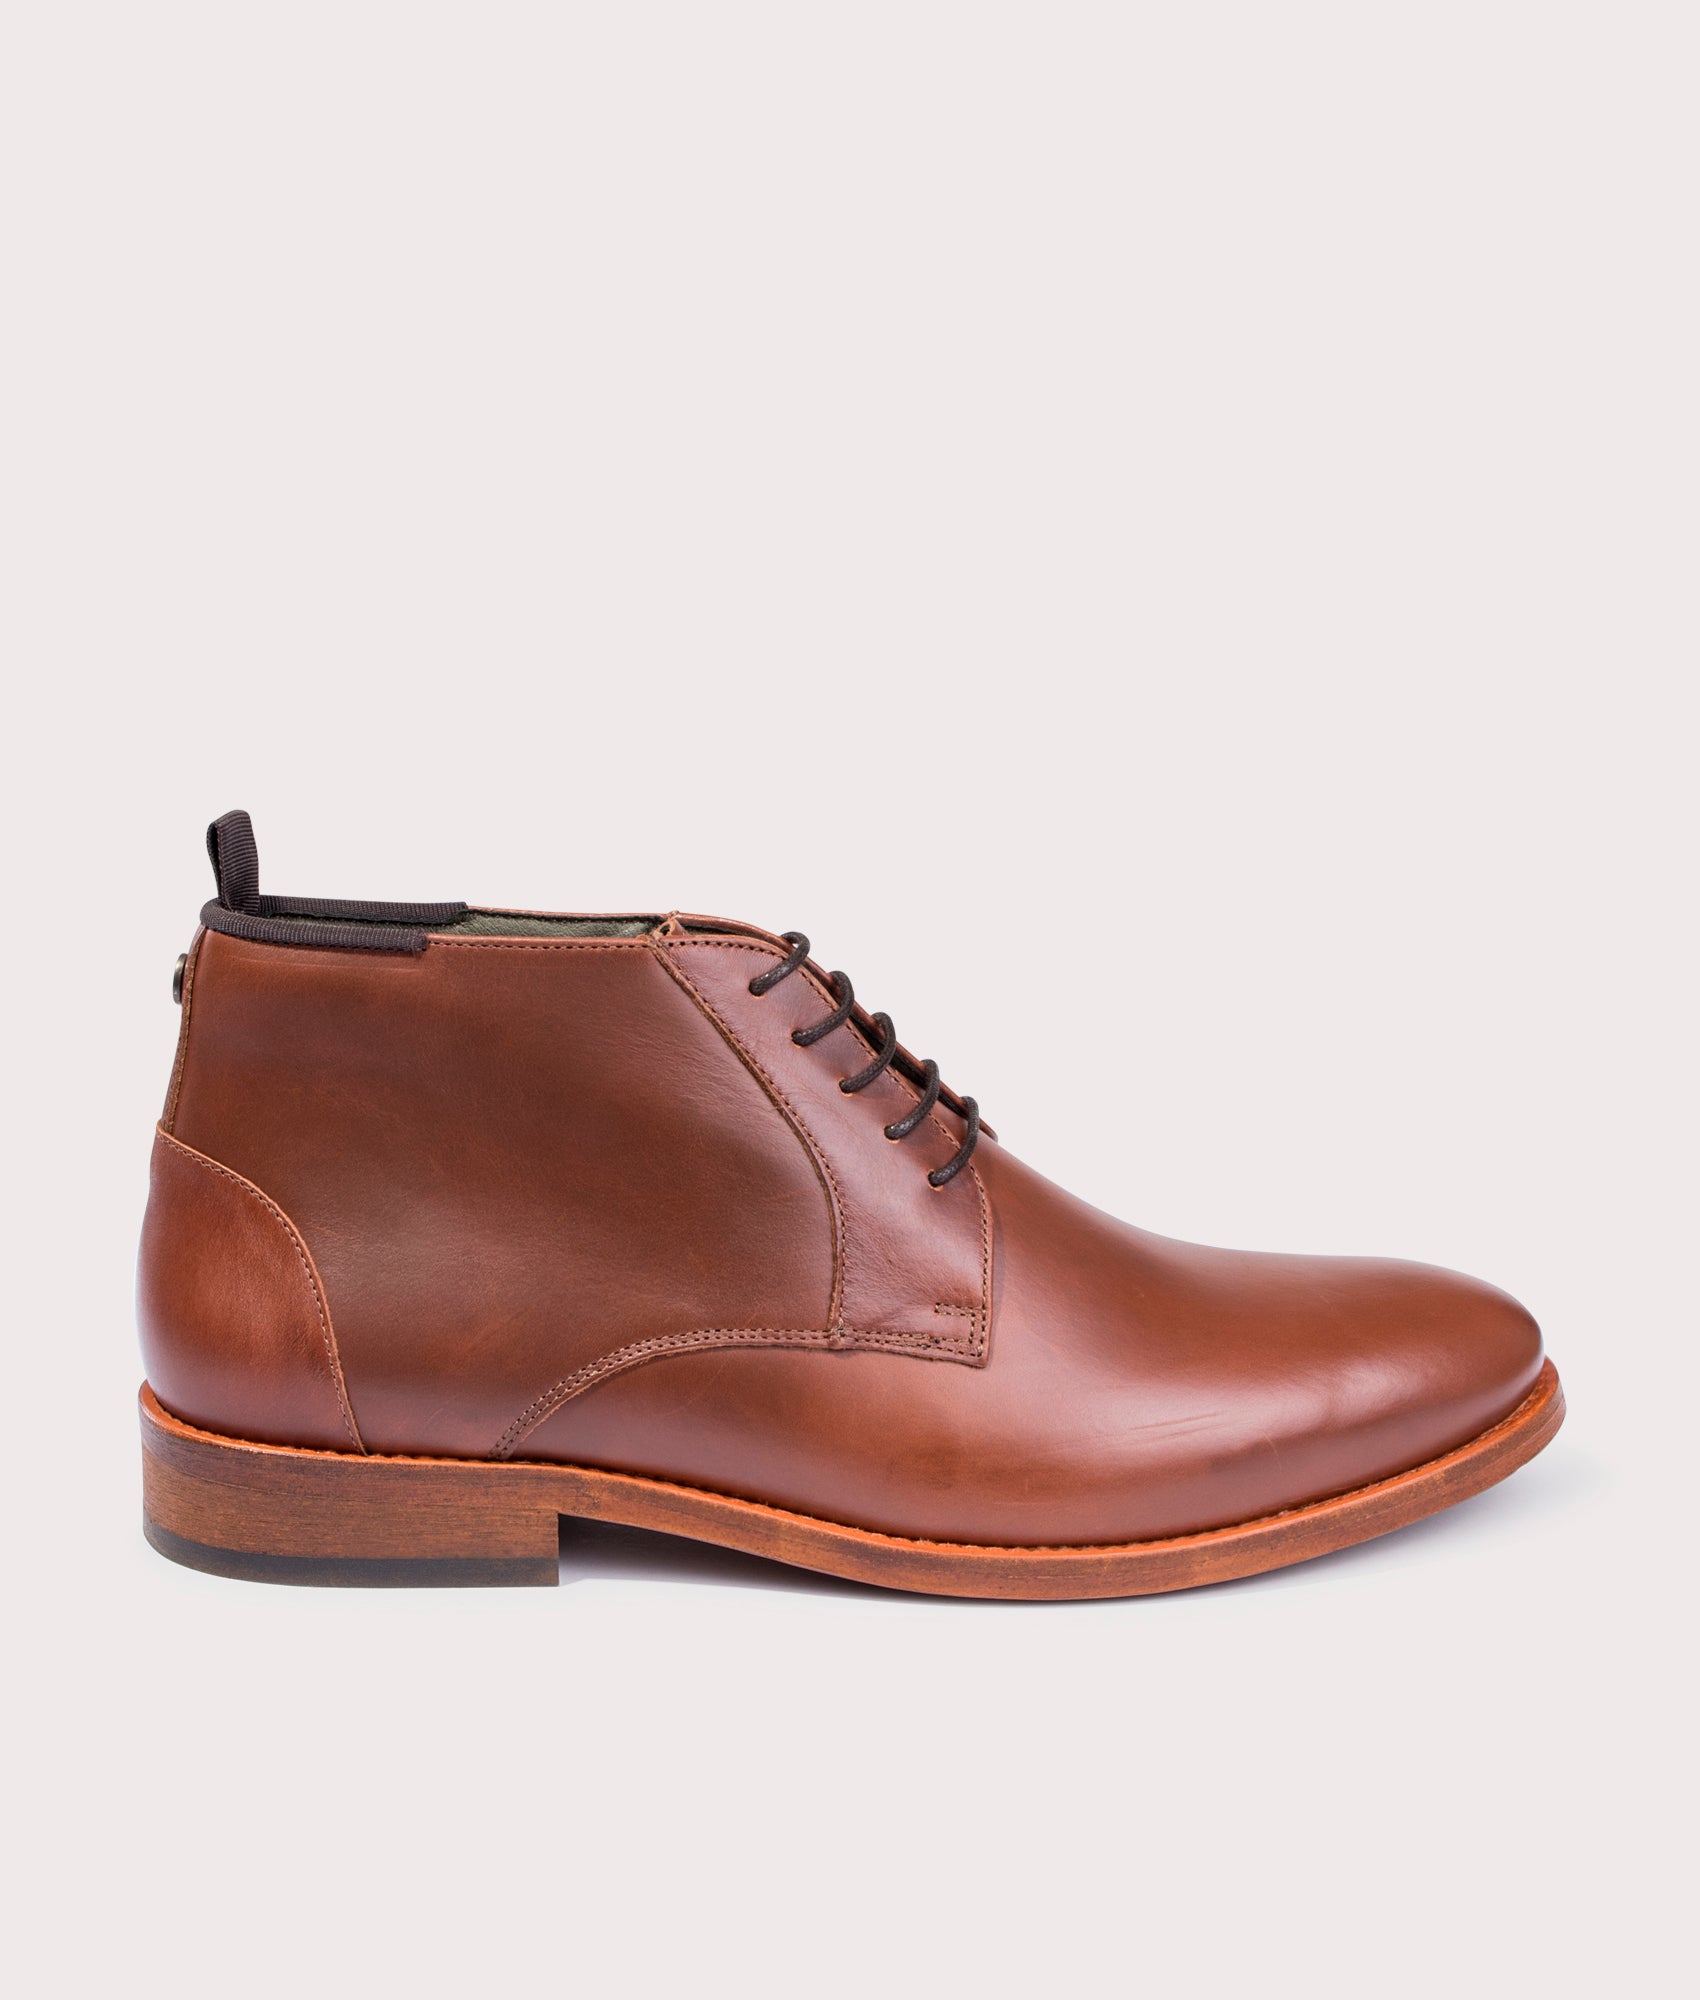 Barbour Lifestyle Mens Benwell Chukka Boots - Colour: BR71 Mahogany - Size: 10